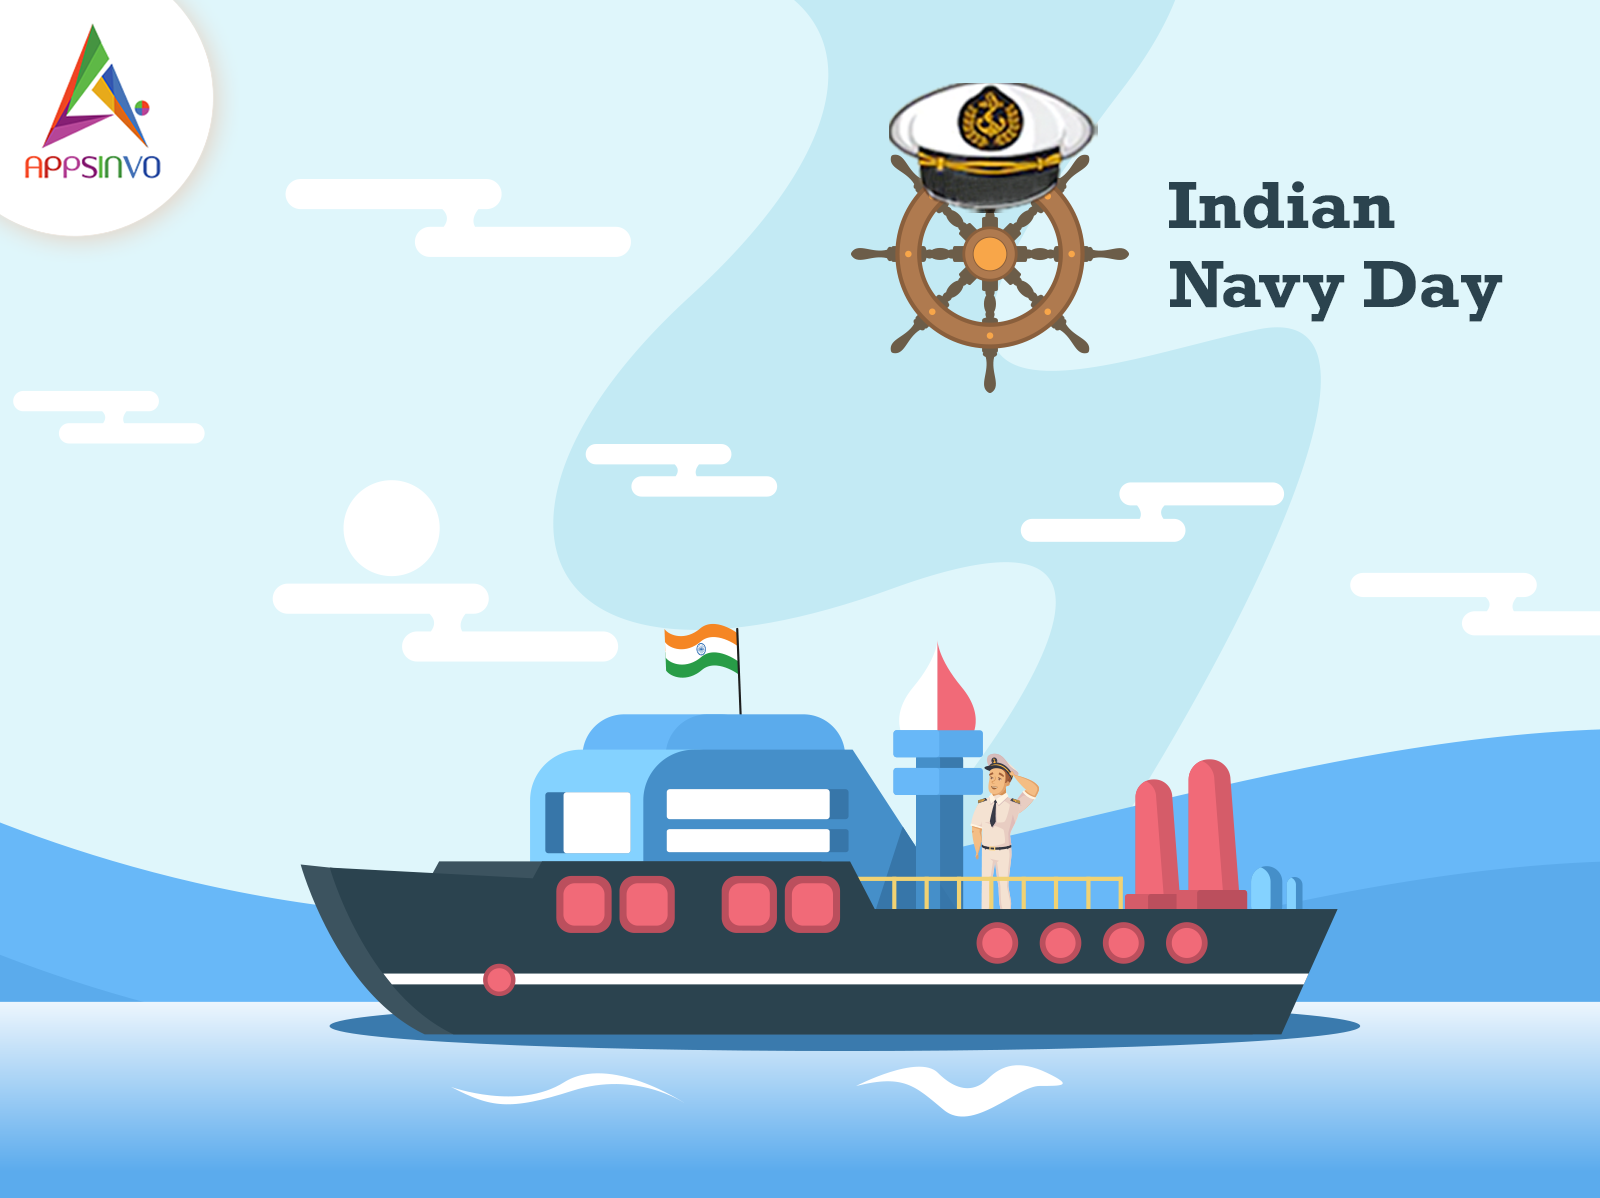 Happy Indian Navy Day 2019 by Appsinvo on Dribbble